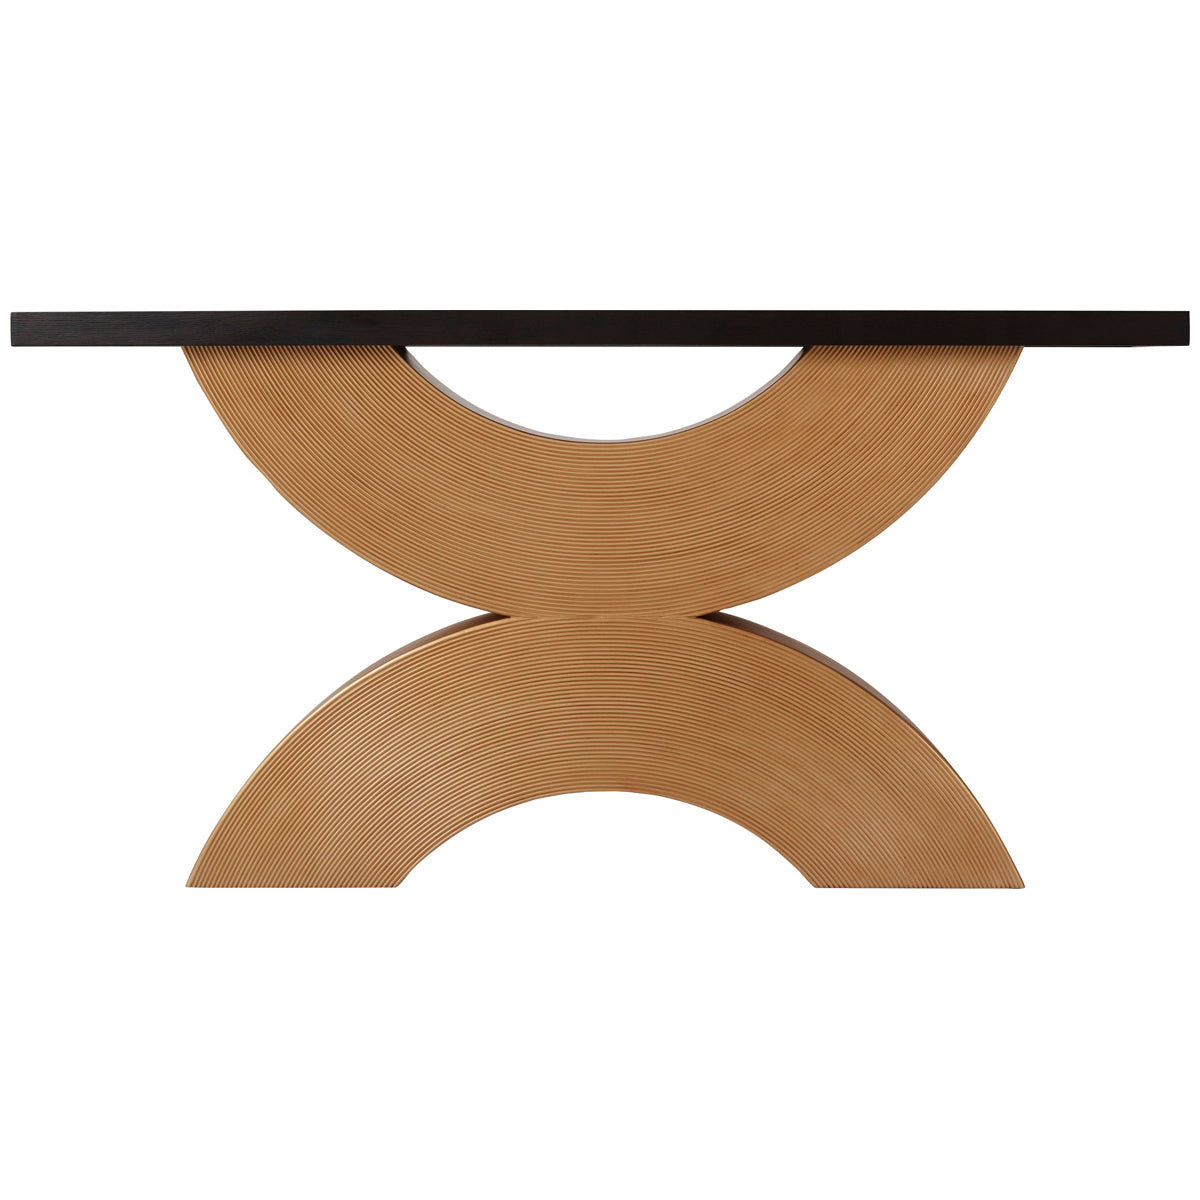 Theodore Alexander Reed Console Table